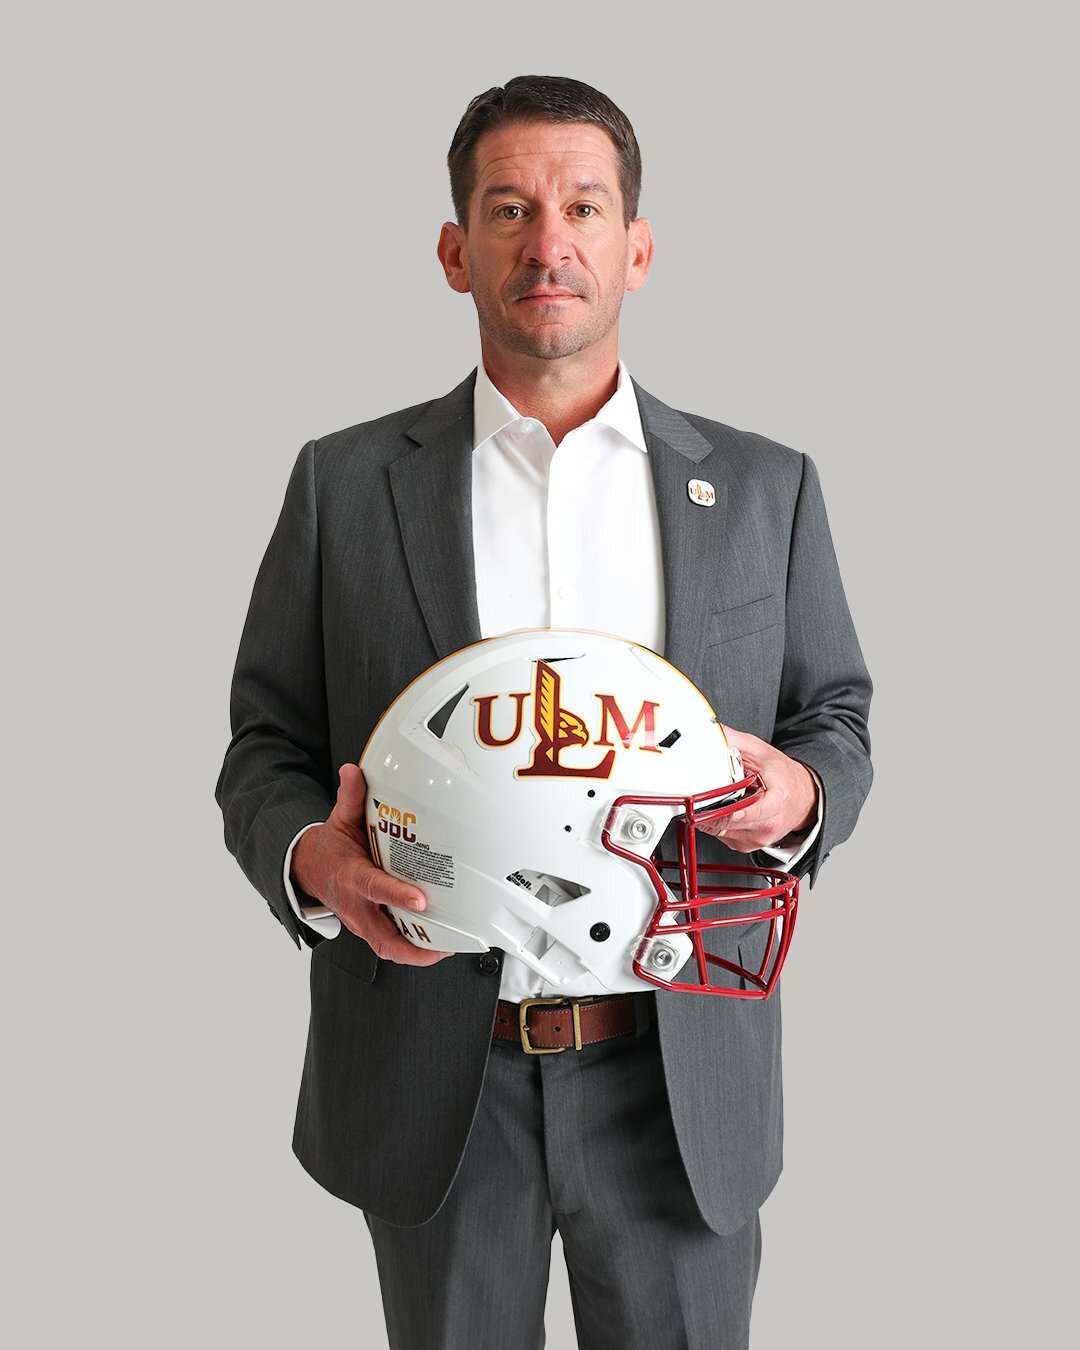 Bryant Vincent was introduced as ULM’s next head football coach during a Wednesday event on campus and said a new era of Warhawk football started on that day, Dec. 6. A former assistant at UAB and South Alabama, Vincent also head coached the Spanish Fort Toros for four seasons and won a state title in 2010.